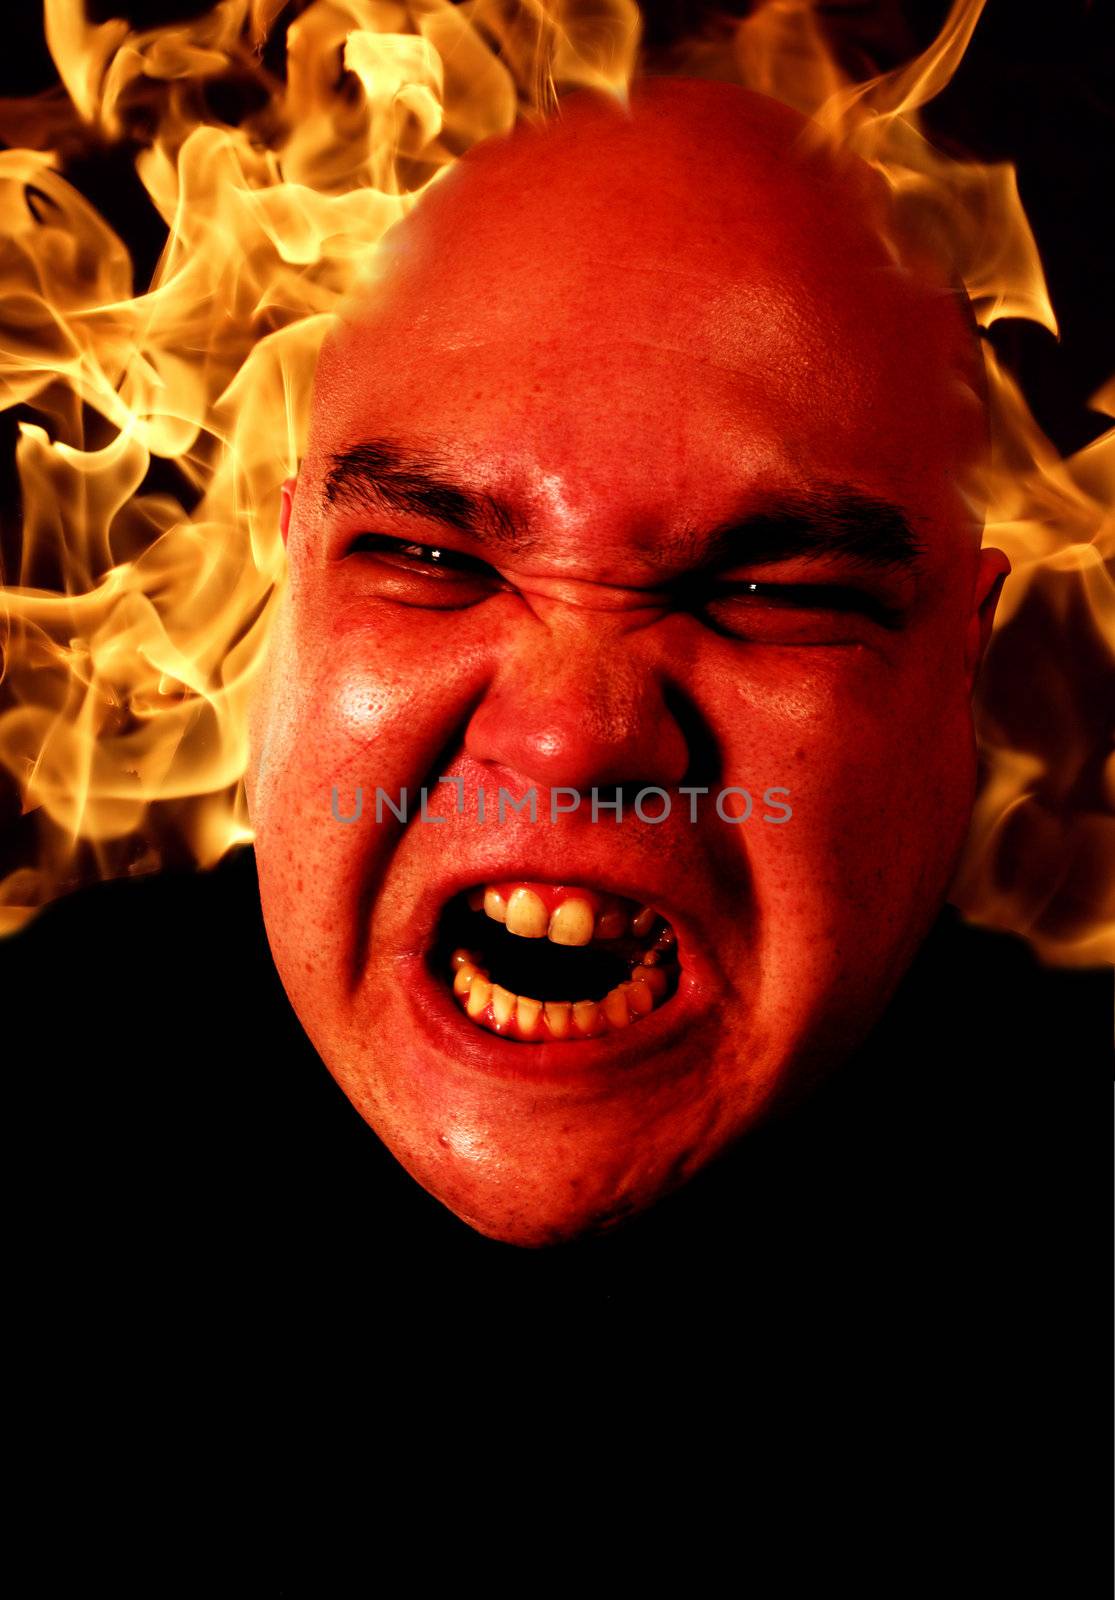 Image of fire and a demonic man.  Two files merged together and enhanced. Flame image is from my portfolio.  Sure, it's overfiltered - but in a good way. Anger management and all that stuff...
